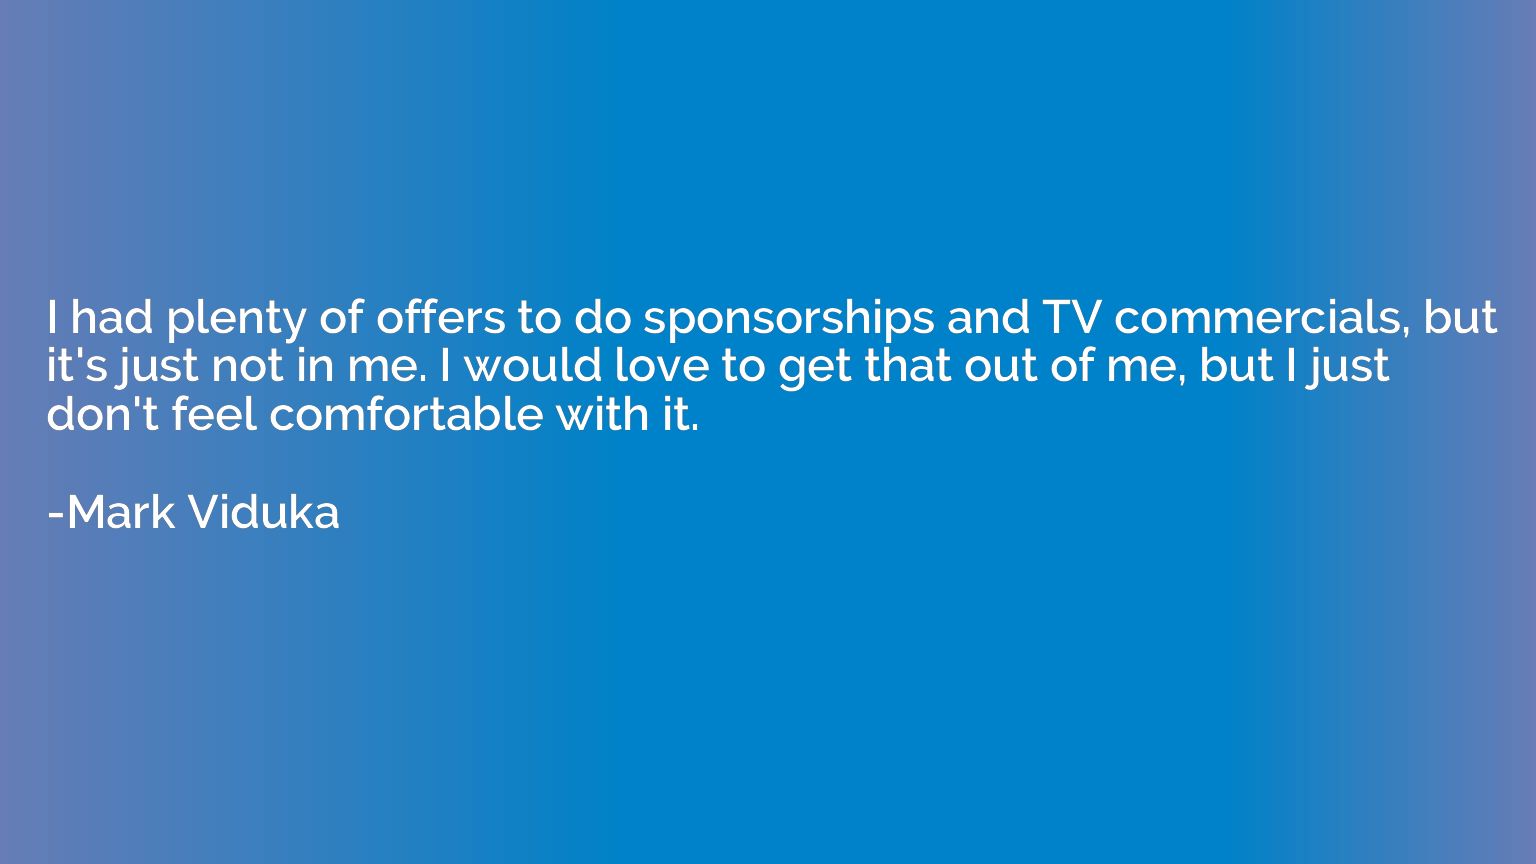 I had plenty of offers to do sponsorships and TV commercials